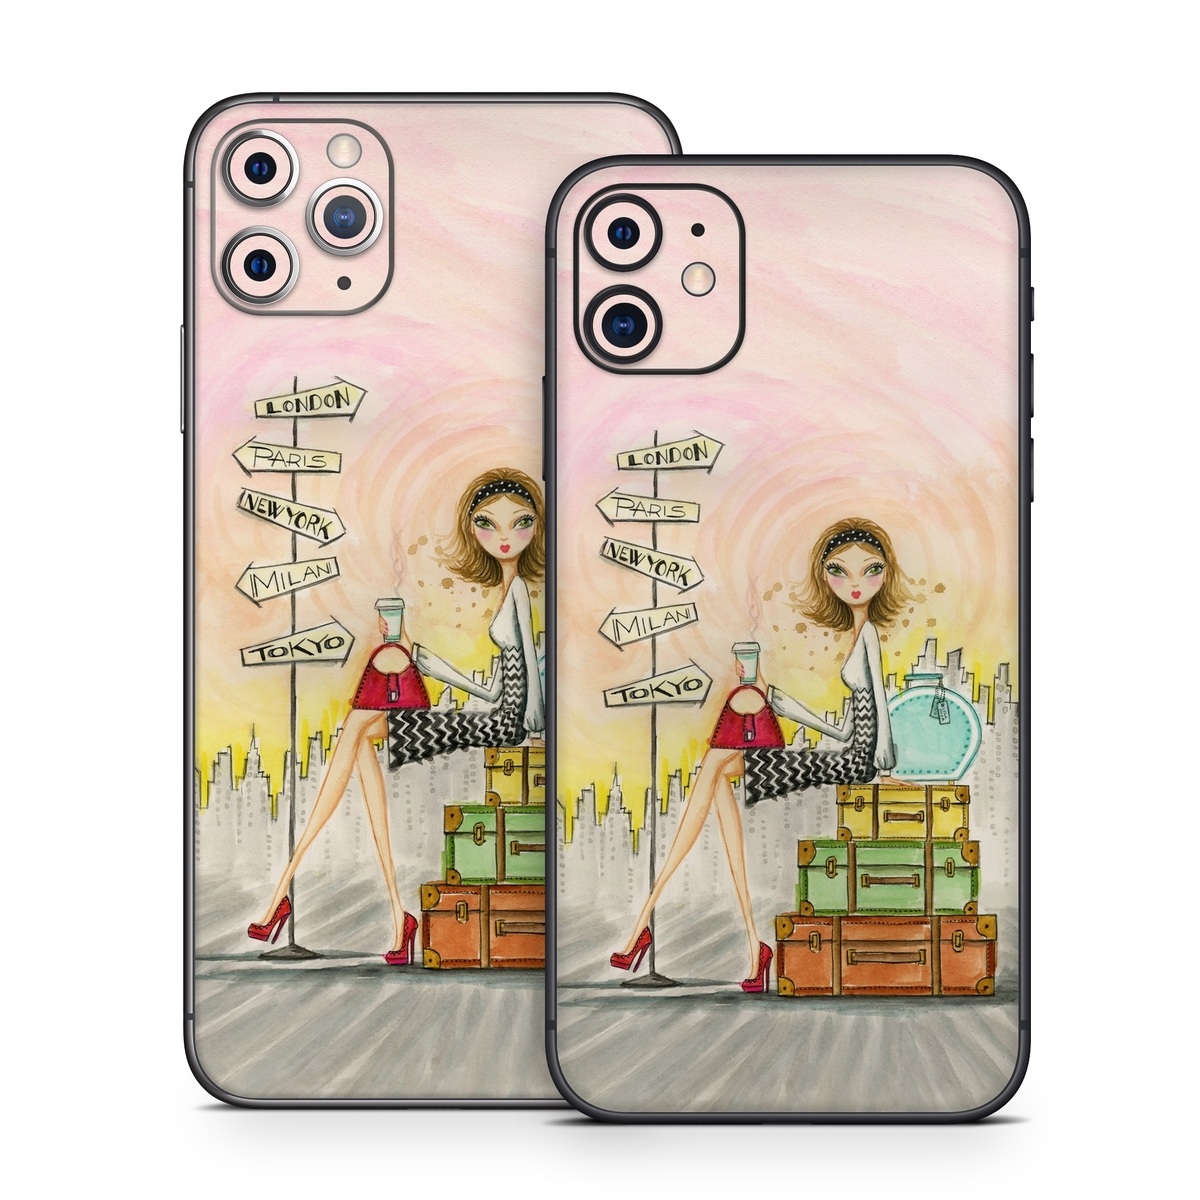 iPhone 11 Series Skin design of Cartoon, Illustration, Art, Watercolor paint, with gray, pink, green, red, black colors